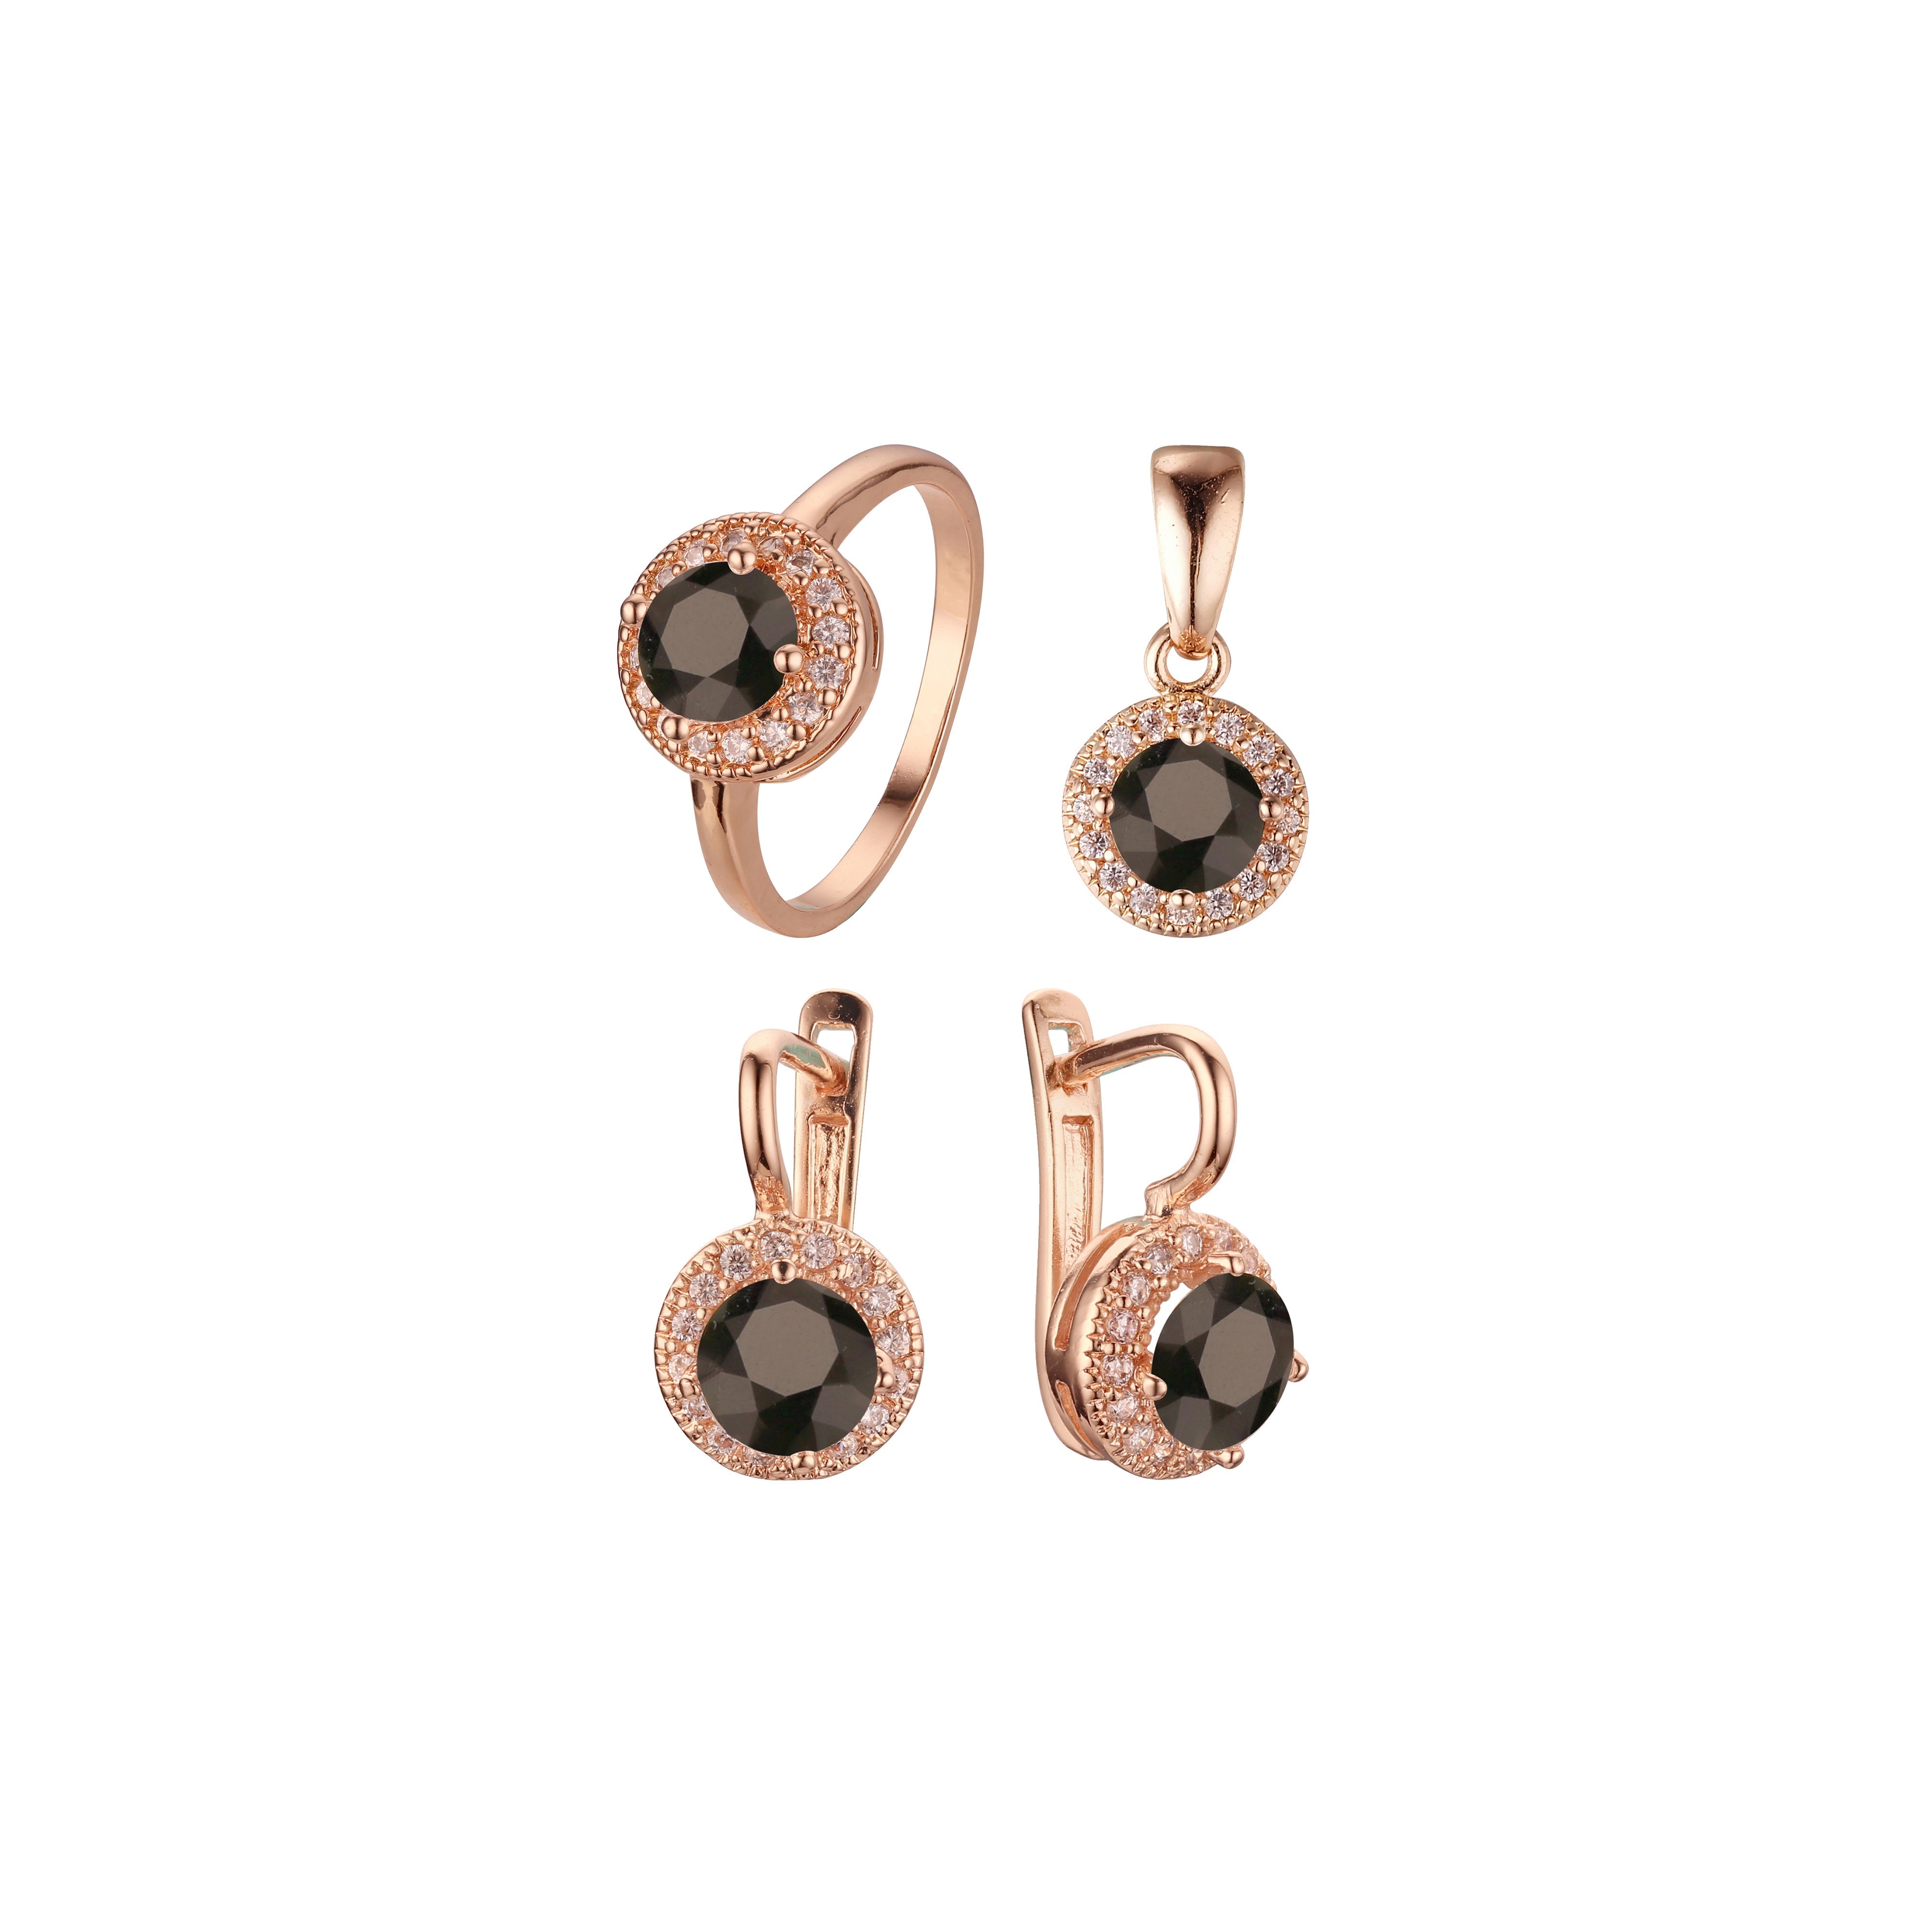 .Rosa's Halo - Big round colorful halo cz Rose Gold plated rings and pendant jewelry set